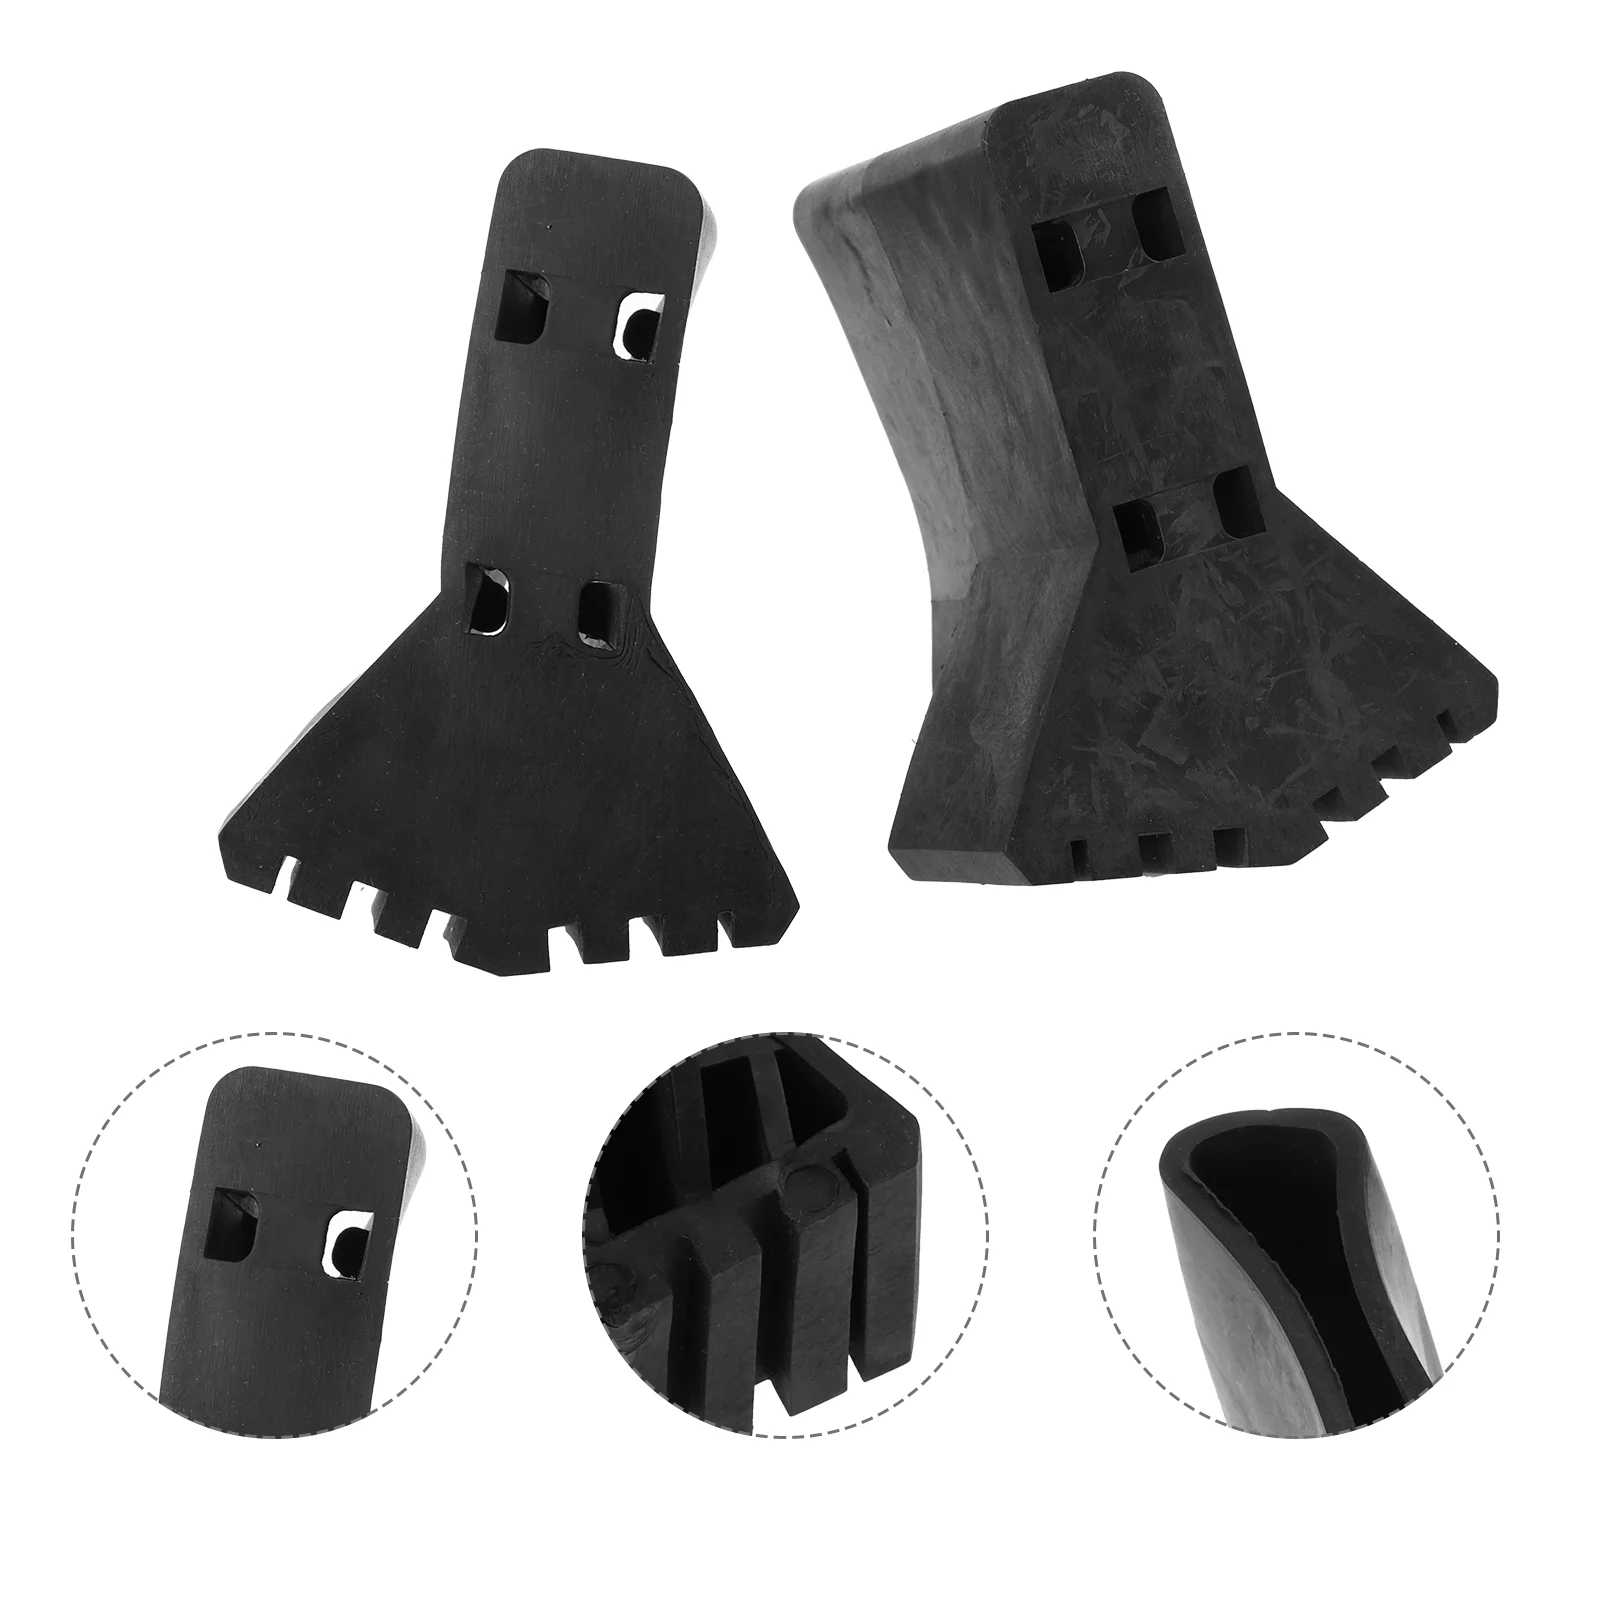 

2 Pcs Ladder Foot Cover Corner Protectors Furniture Black Feet Protective Covers Leveler Non-skid Rubber Folding Useful